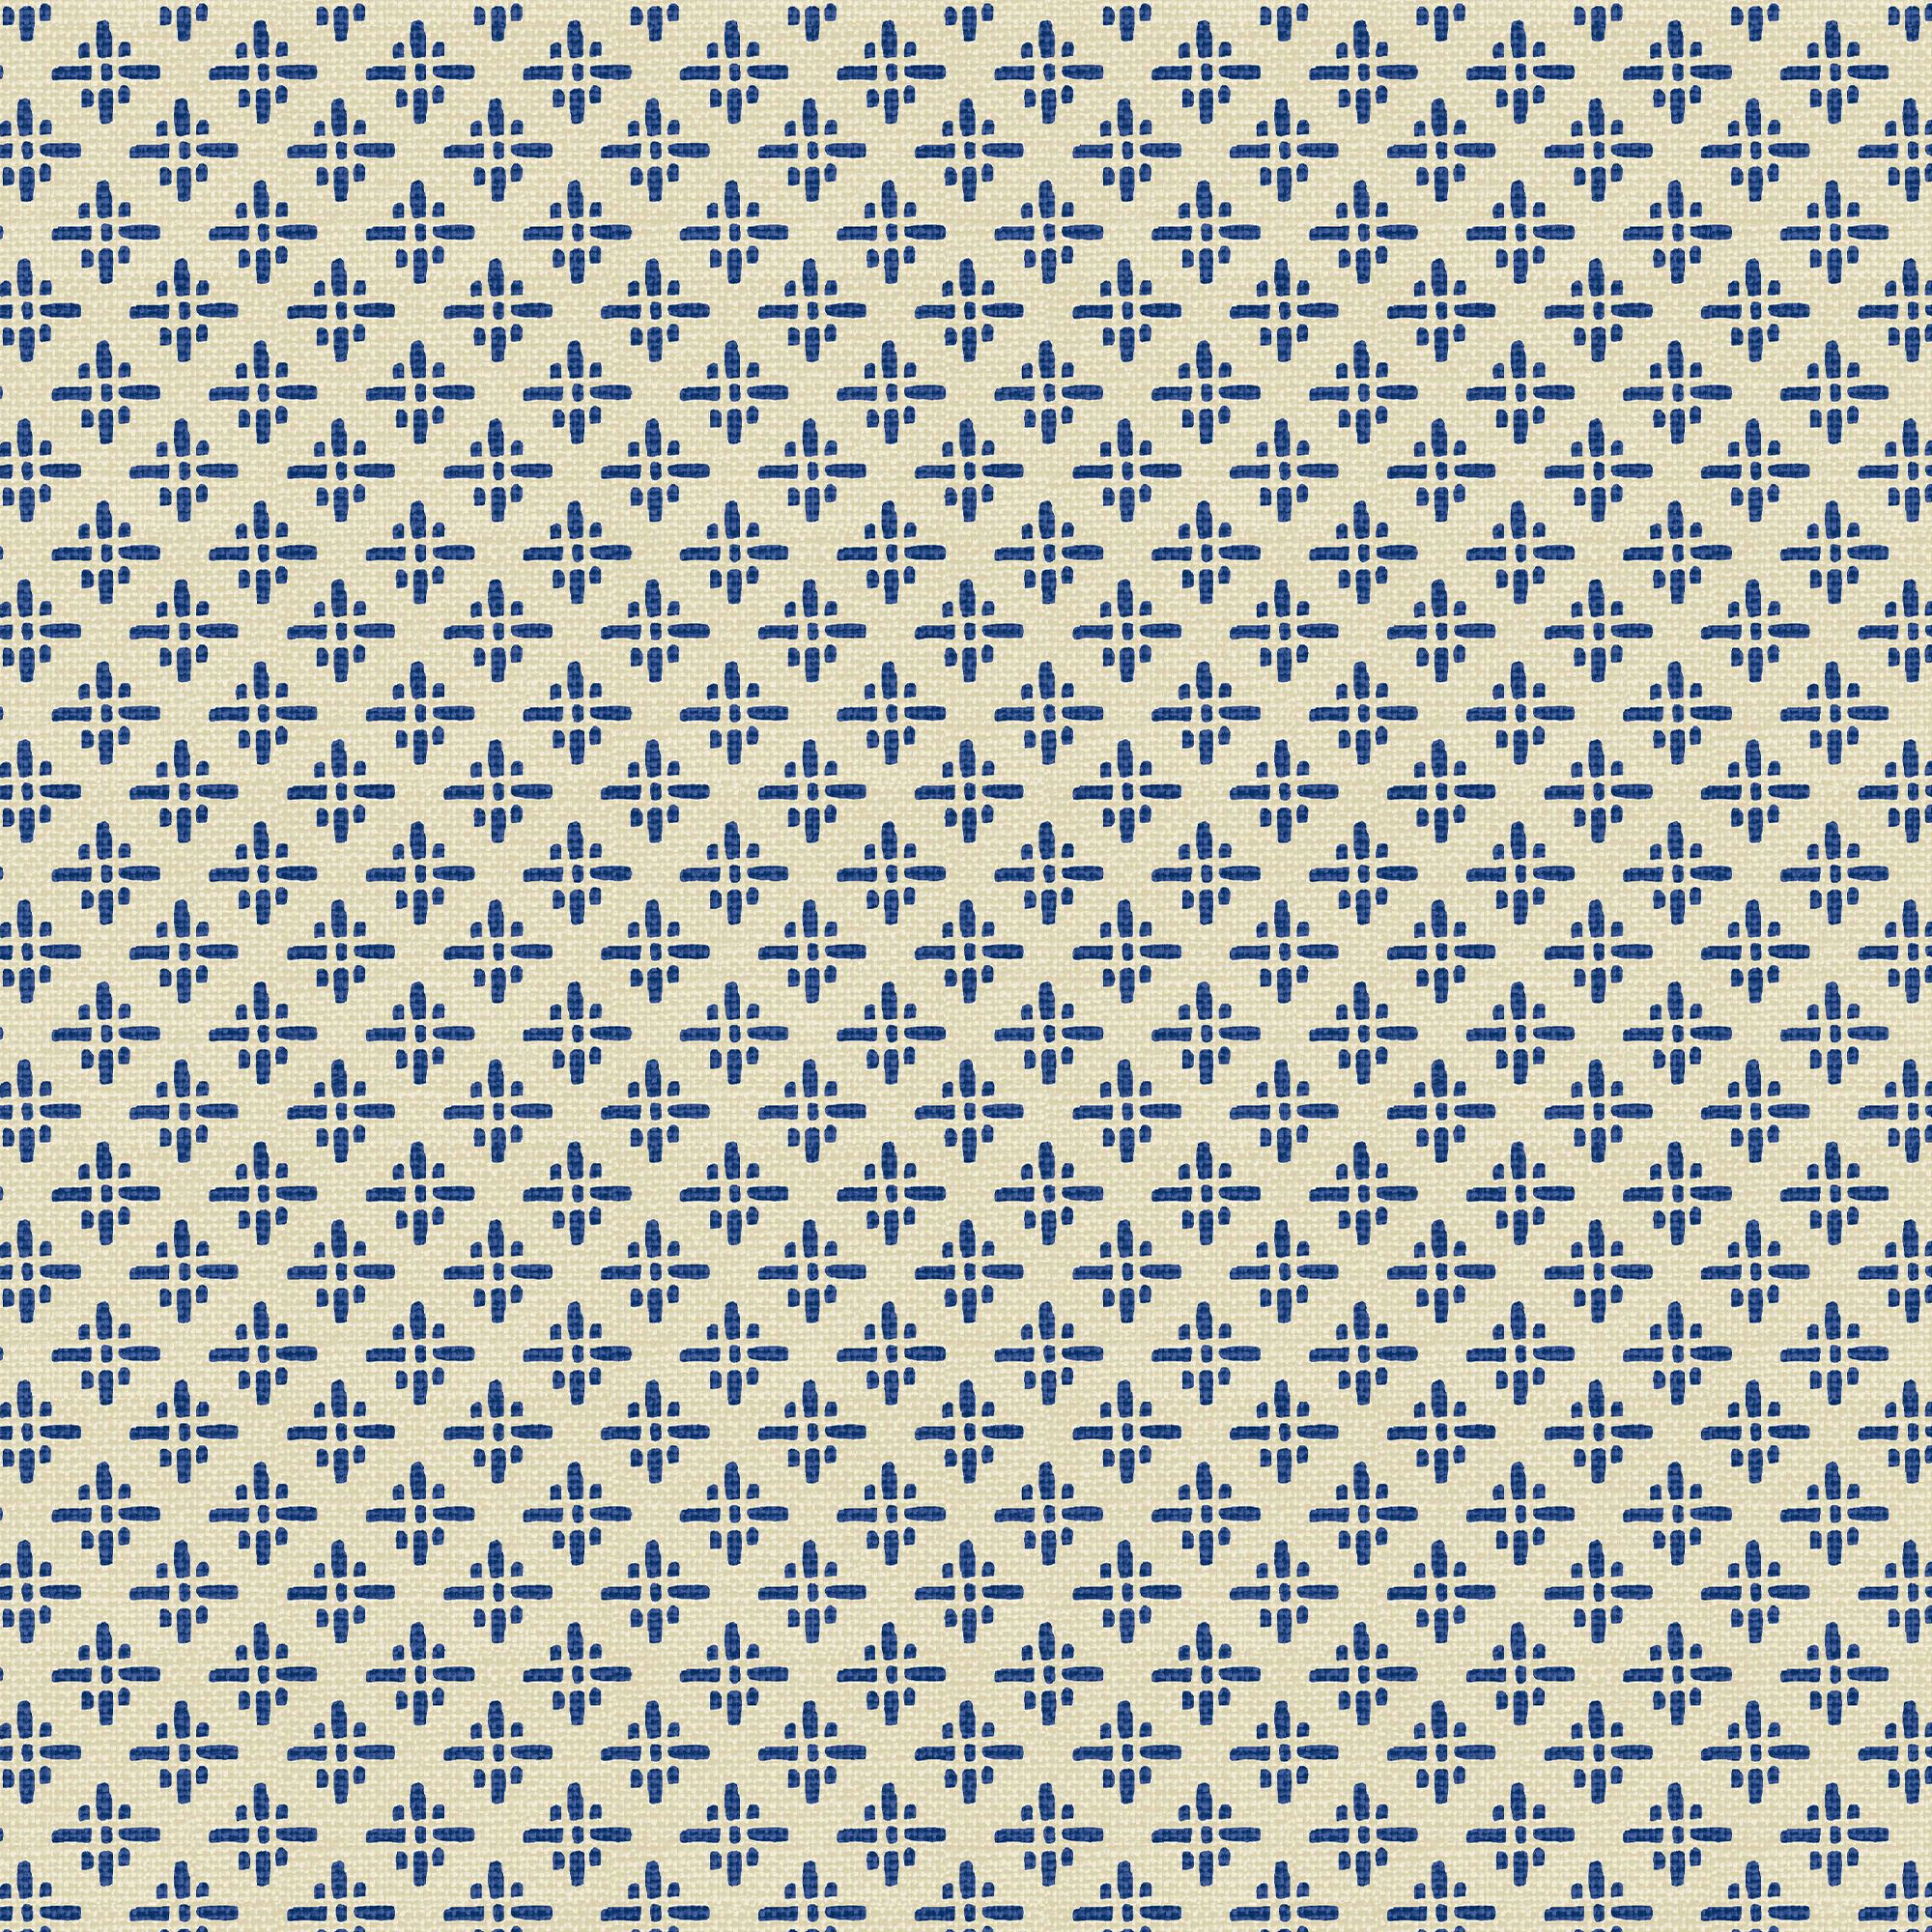 Joules Blue Geometric Smooth Wallpaper Sample